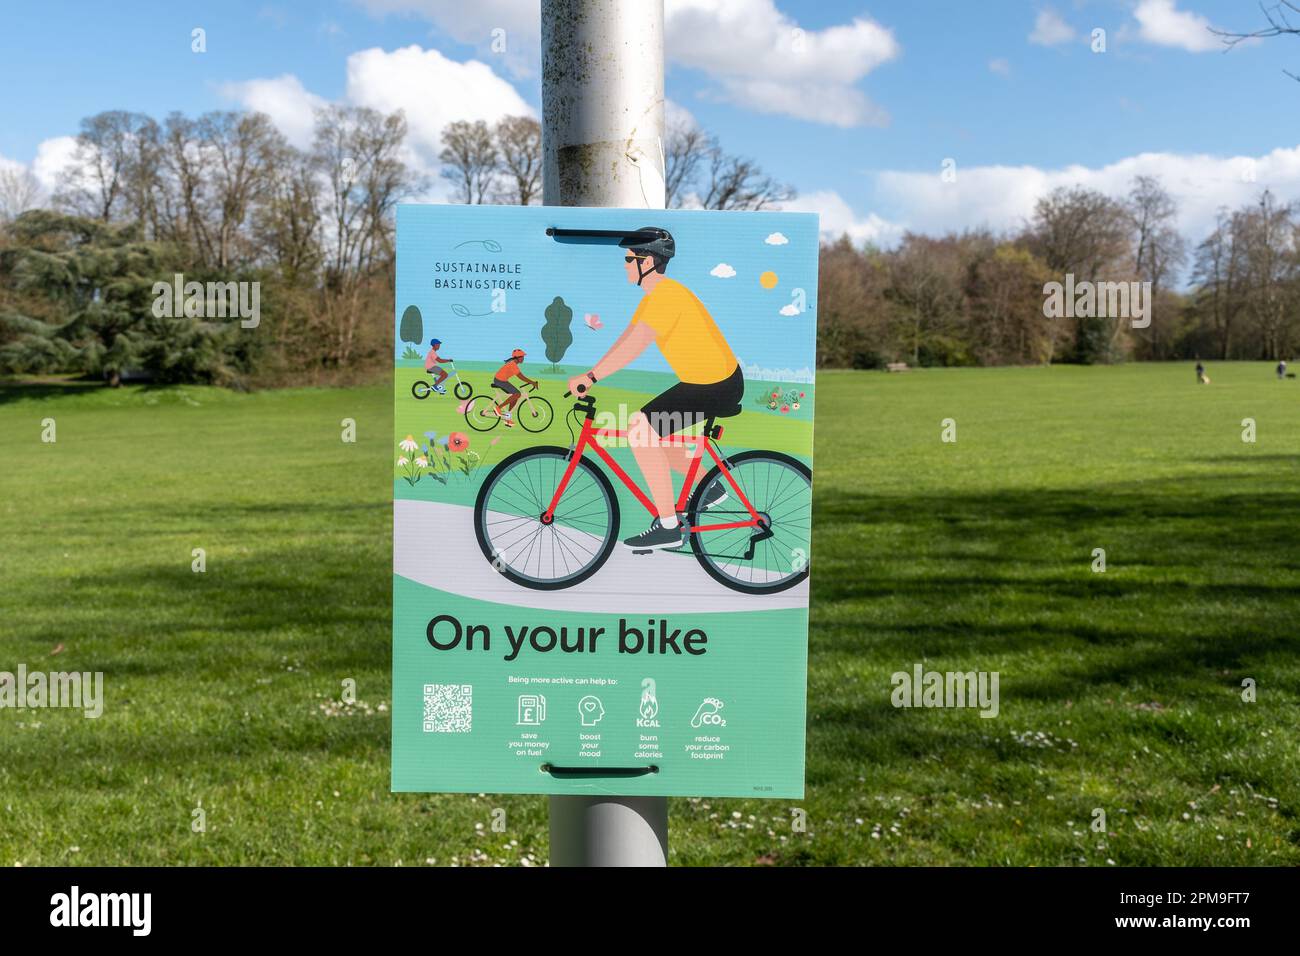 On Your Bike sign or notice by Sustainable Basingstoke in the War Memorial Park encouraging people to get active, Hampshire, England, UK Stock Photo